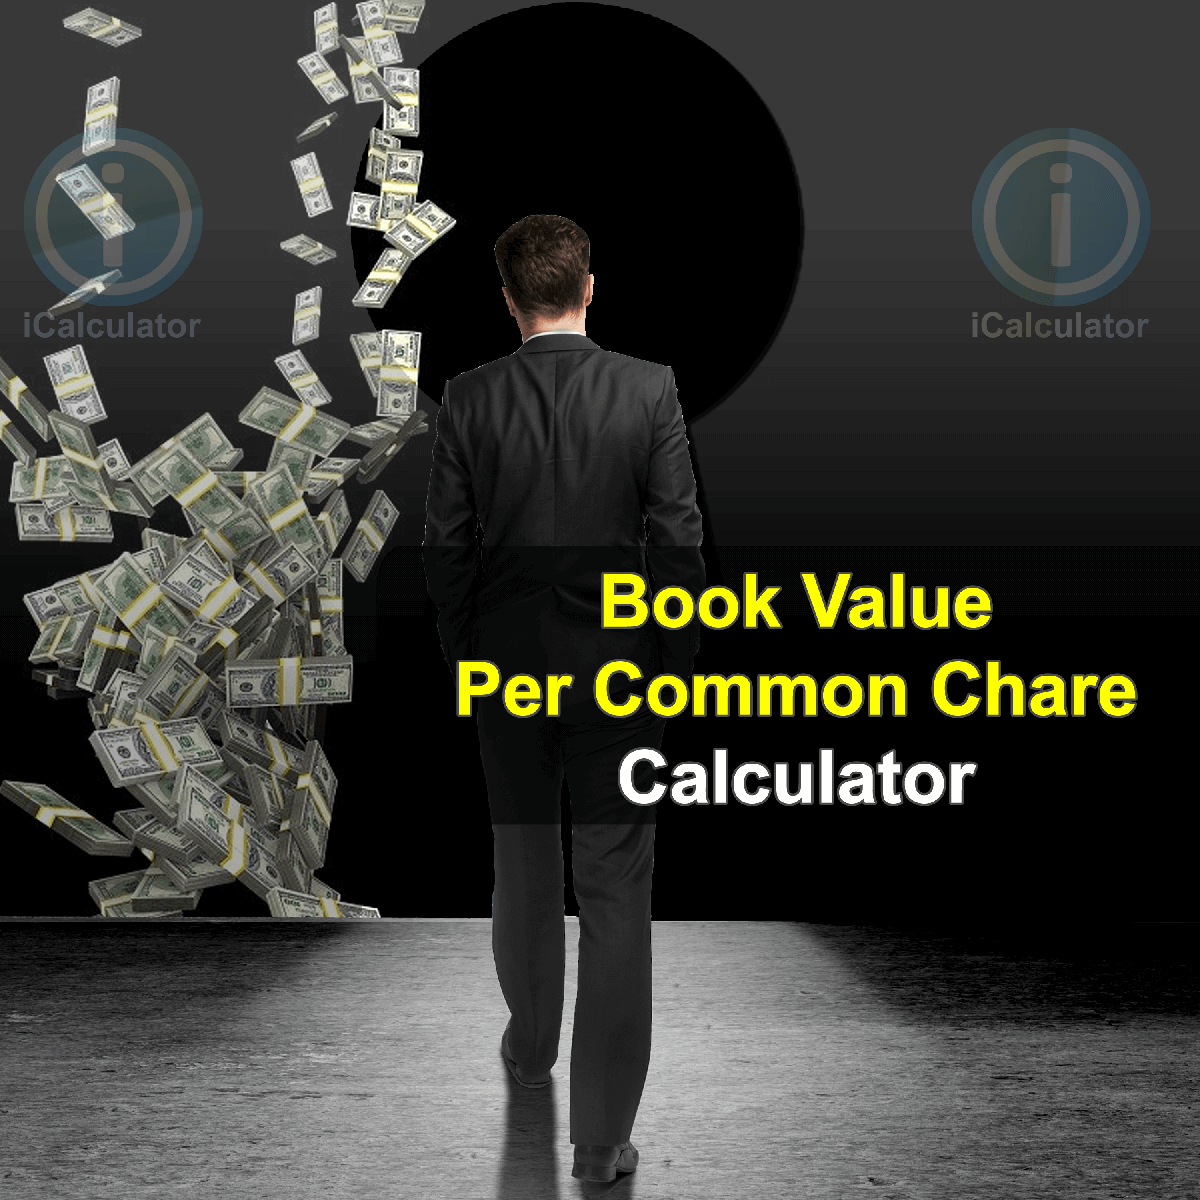 Book Value Per Common Share Ratio Calculator. This image provides details of how to calculate Book Value Per Common Share Ratio using a calculator and notepad. By using the Book Value Per Common Share Ratio formula, the Book Value Per Common Share Ratio Calculator provides a true calculation of the per share value of a company's stock based on common shareholder's equity in the company